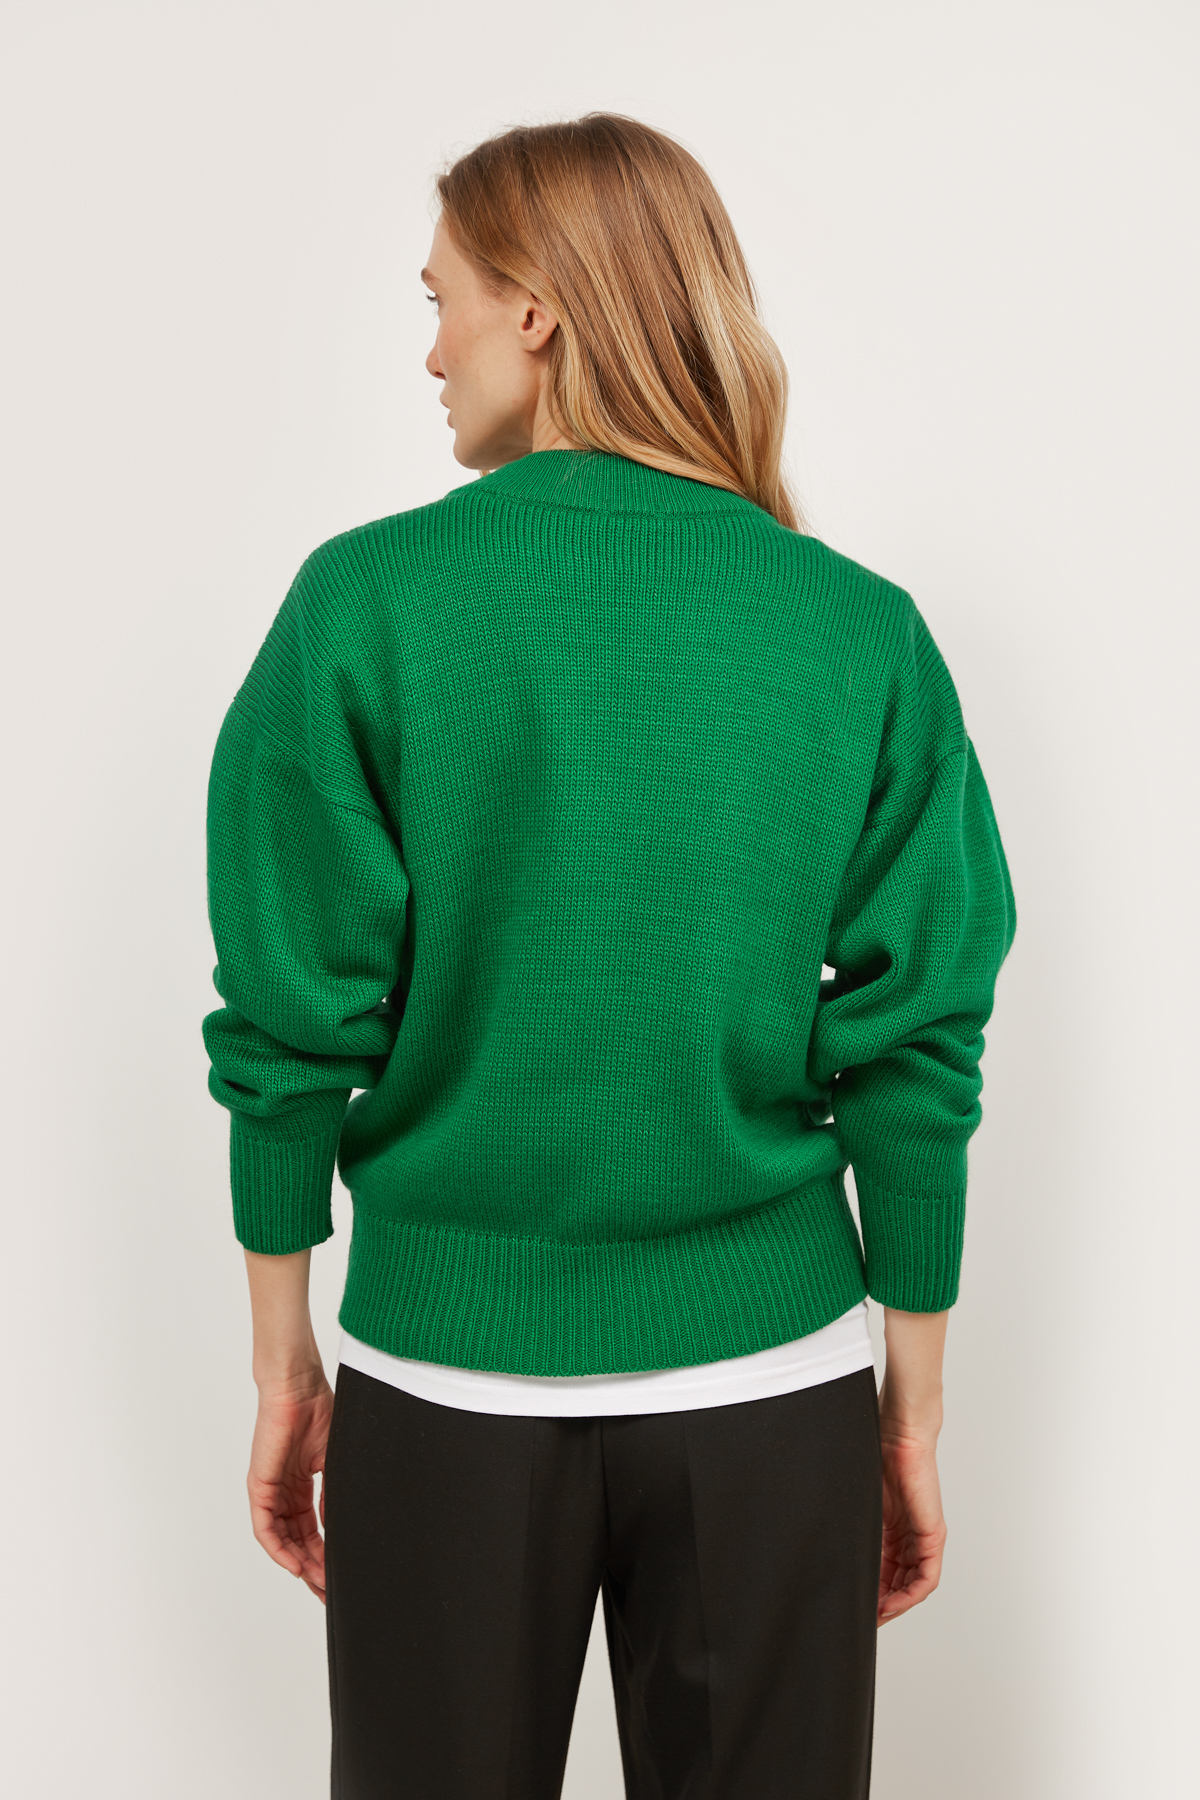 Bright green knitted sweater, photo 4